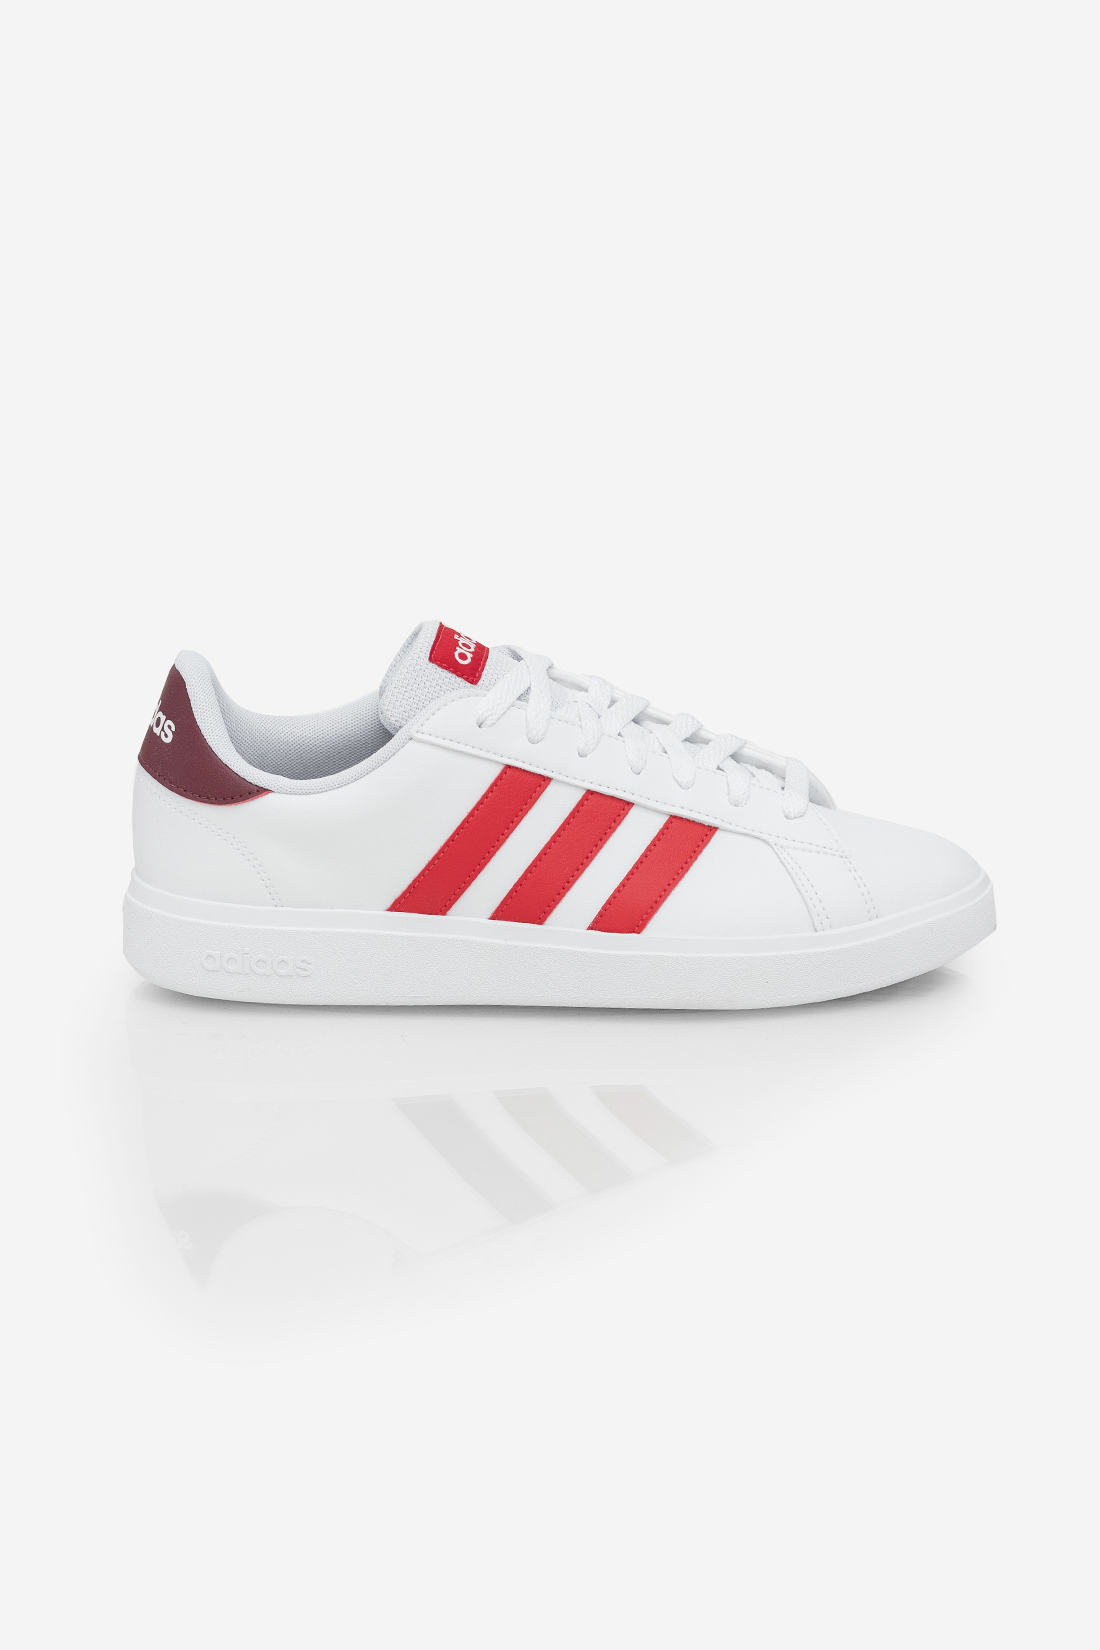 Tenis Casual Adidas Grand Court Base 2.0